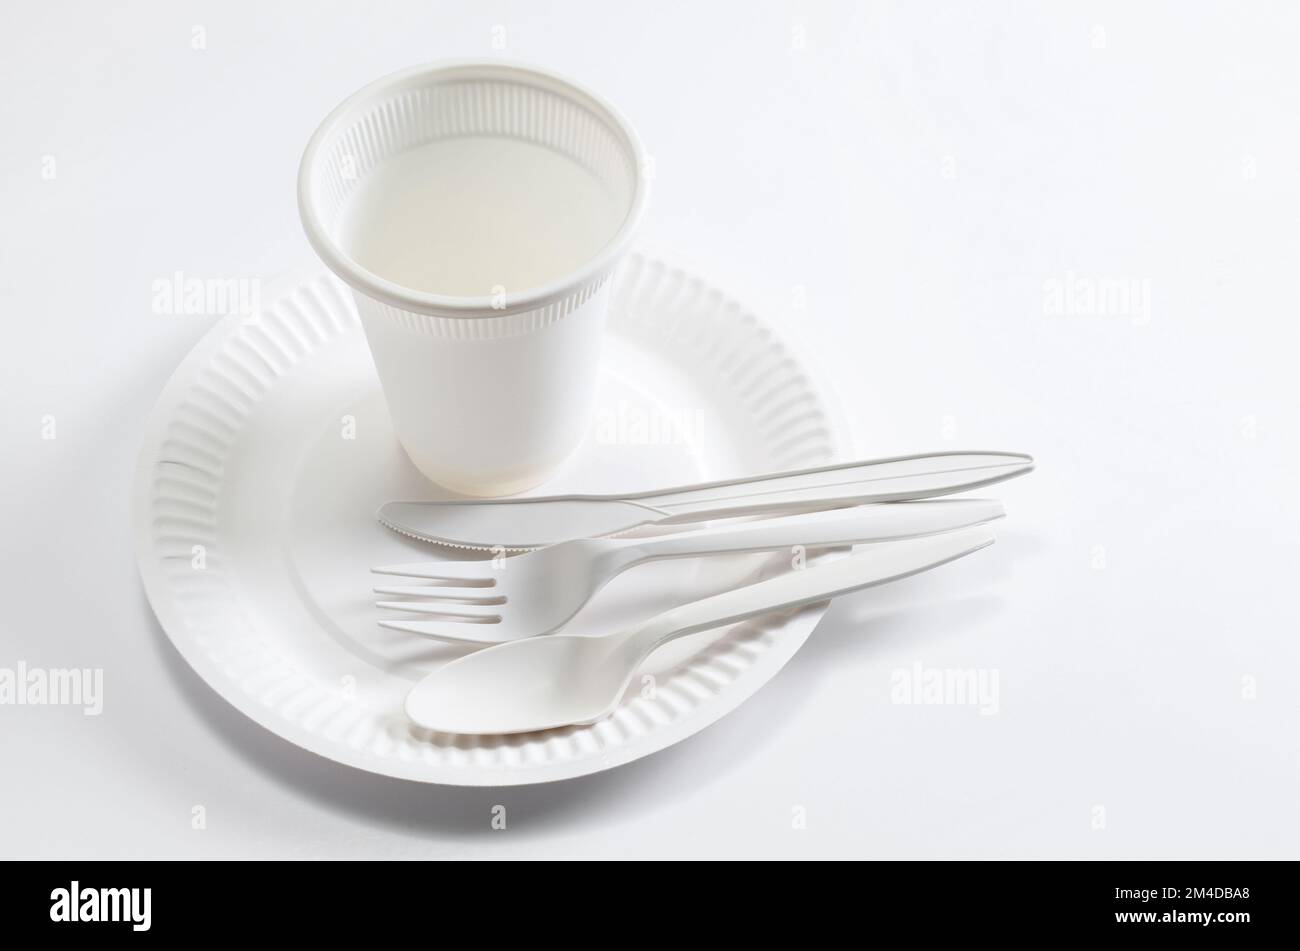 Paper plate, spoon, fork, knife and plastic glass on white background ...